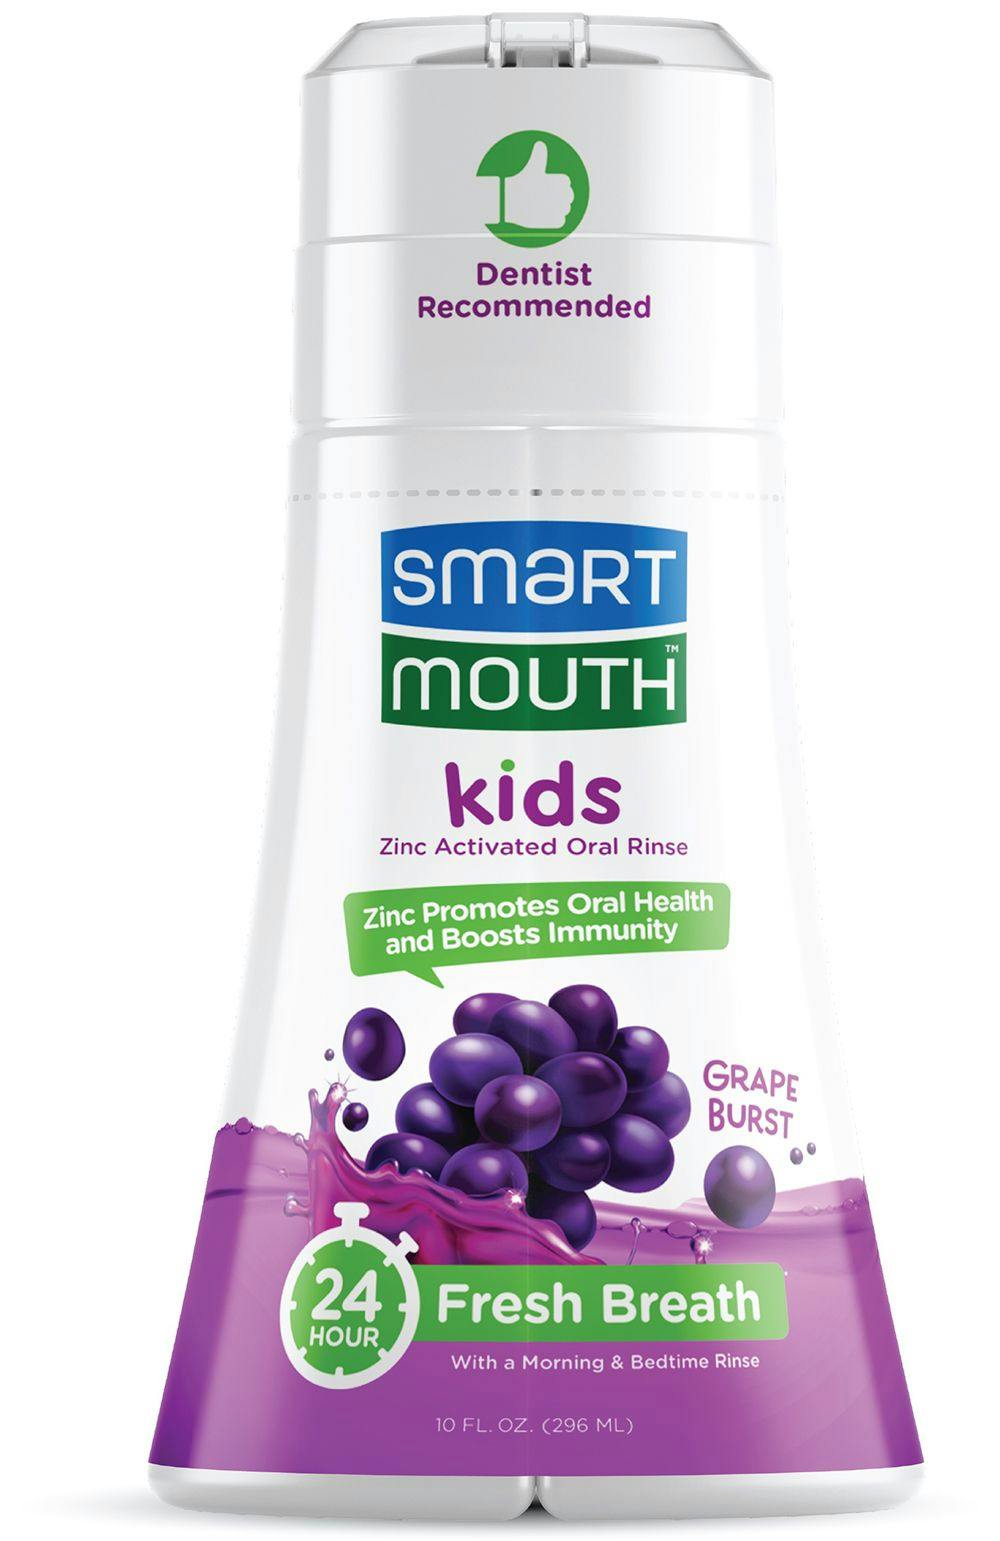 SmartMouth’s New Activated Mouthwash Formulated for Kids